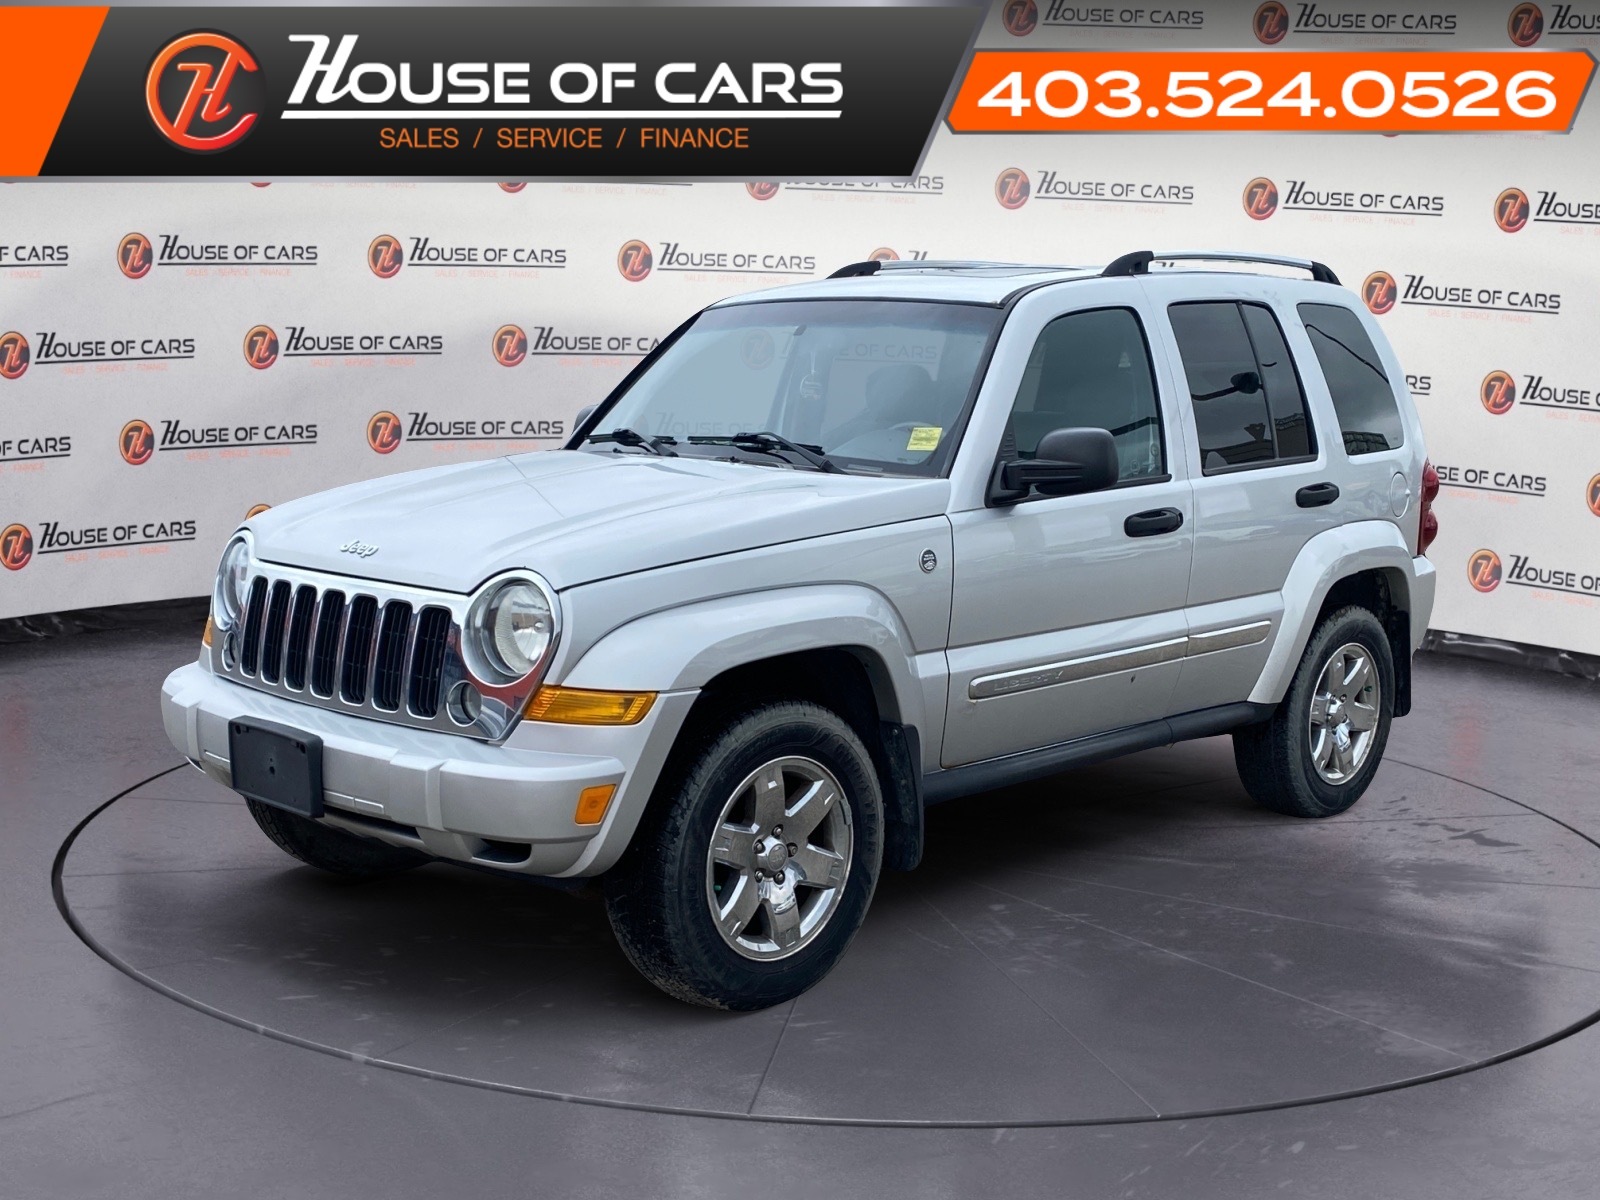 2007 Jeep Liberty 4WD 4dr Limited Edition